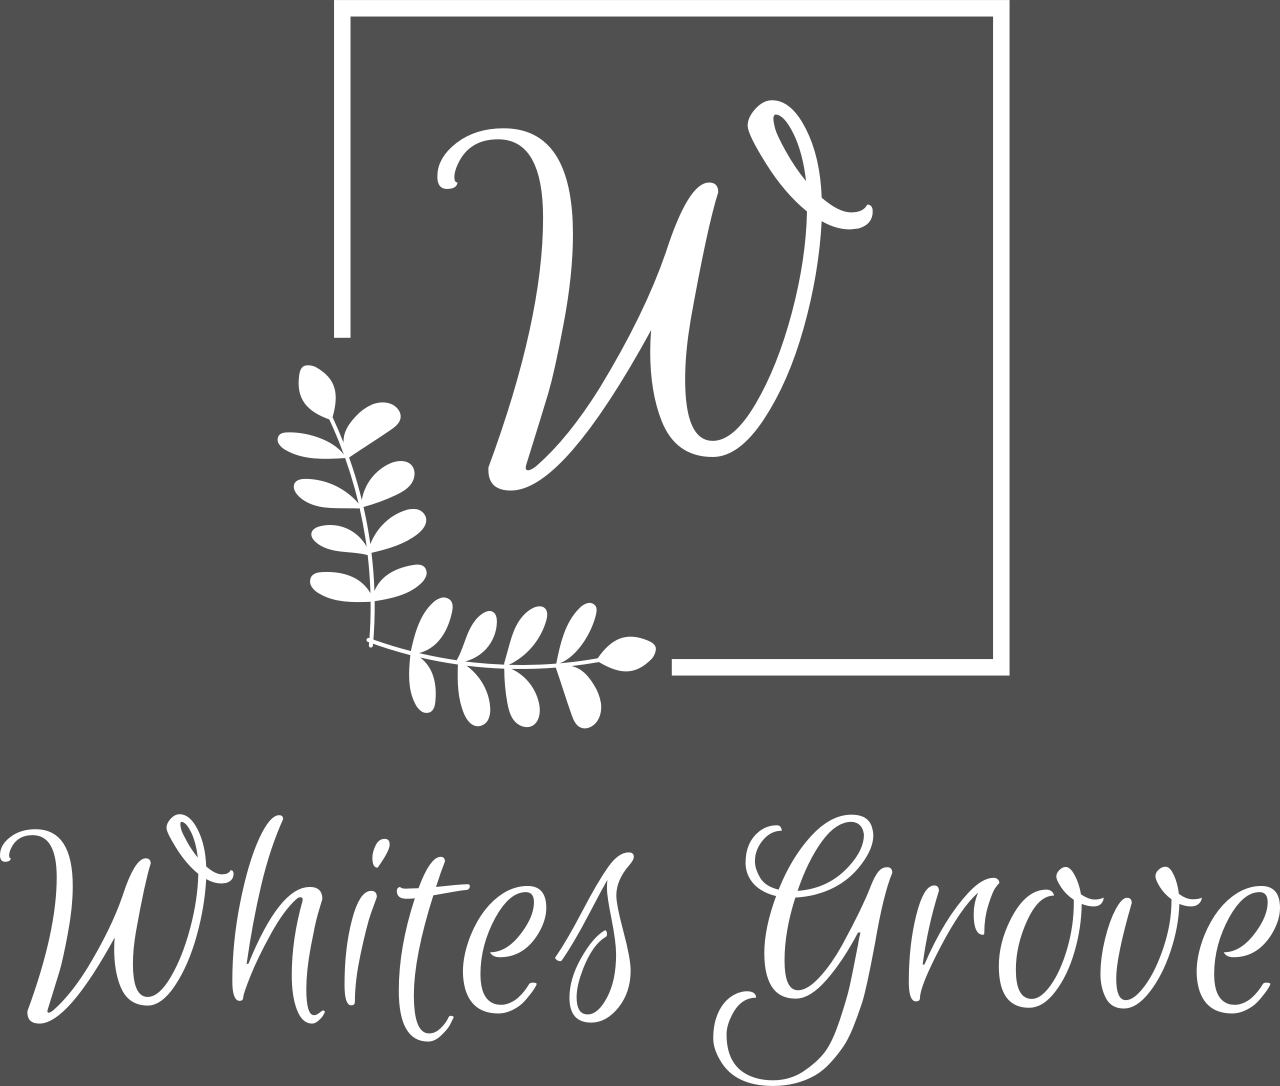 Whites Grove's web page